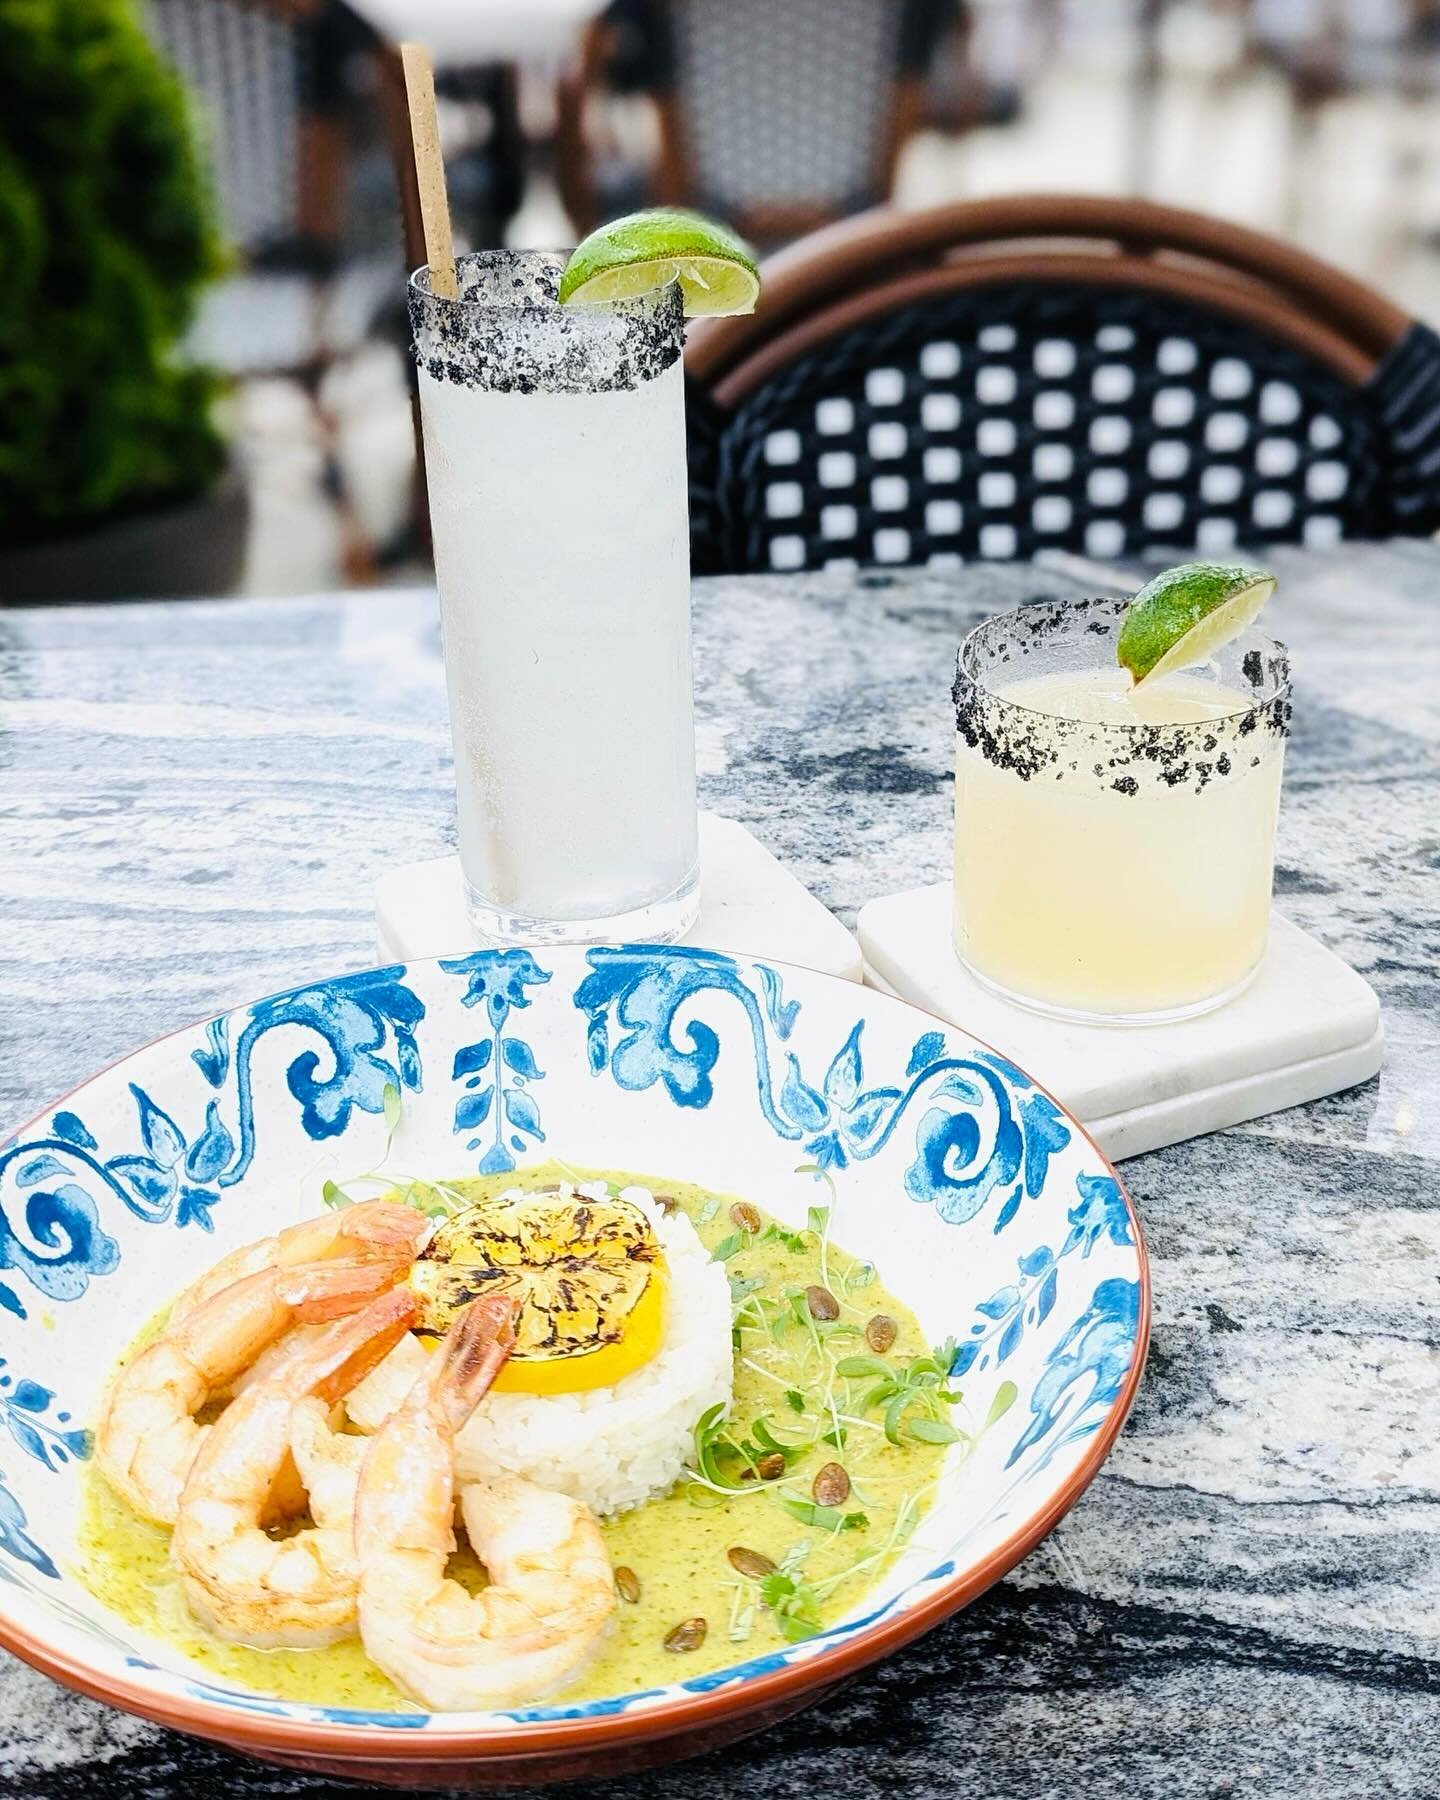 This is more than just tacos and margs! Our four-course Cinco de Mayo dinner features a variety of our favorite Mexican flavors. 

The second course features grilled shrimp in salsa paired with a Sotol-based cocktail featuring Los Magos Sotol, a uniq